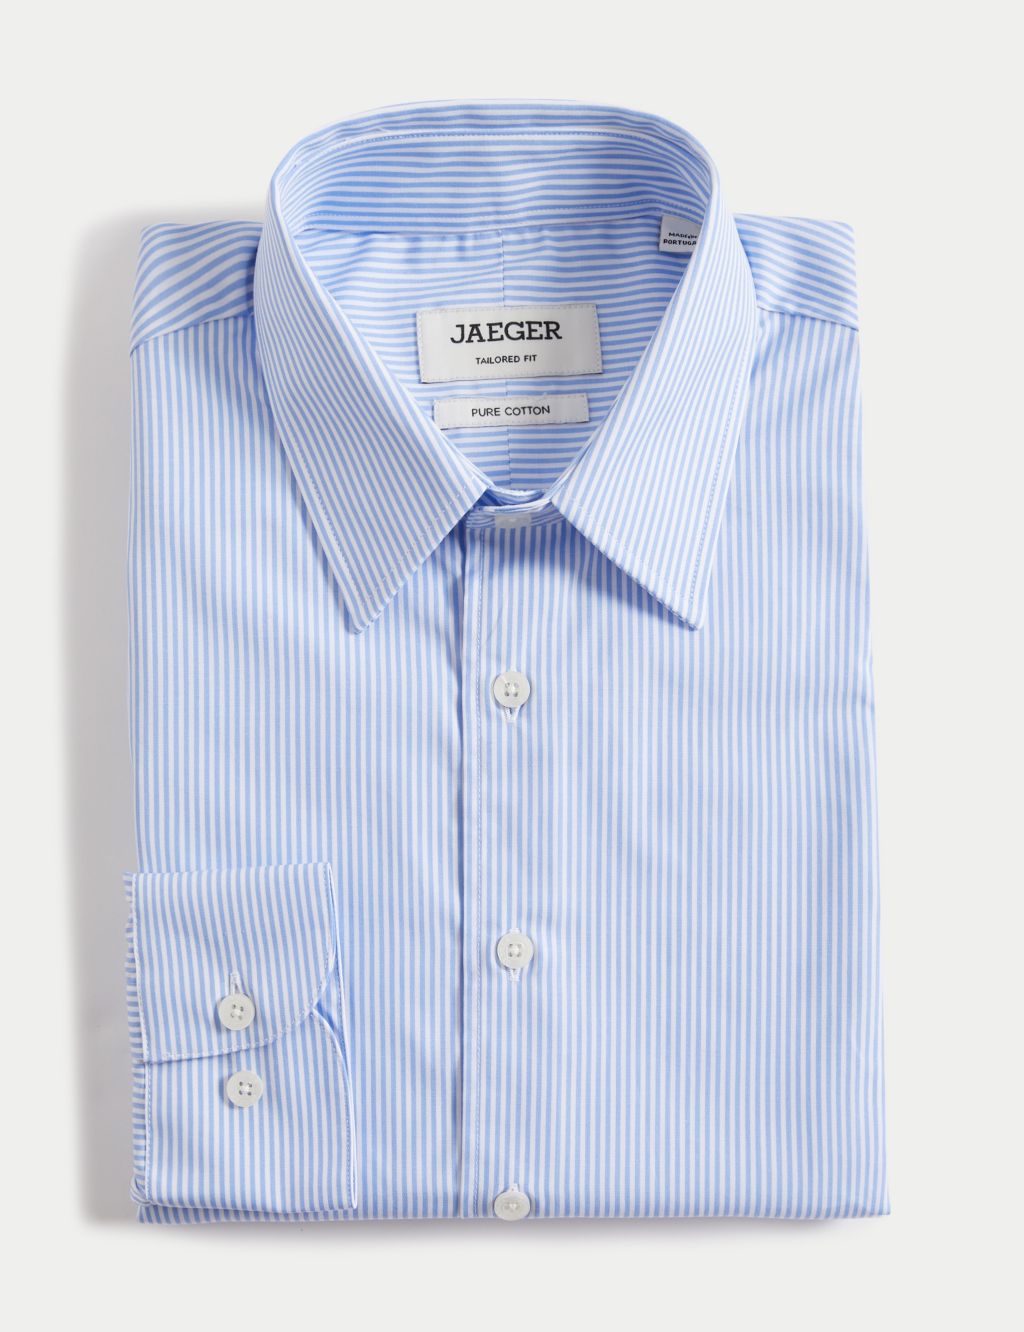 Tailored Fit Pure Cotton Twill Striped Shirt image 2